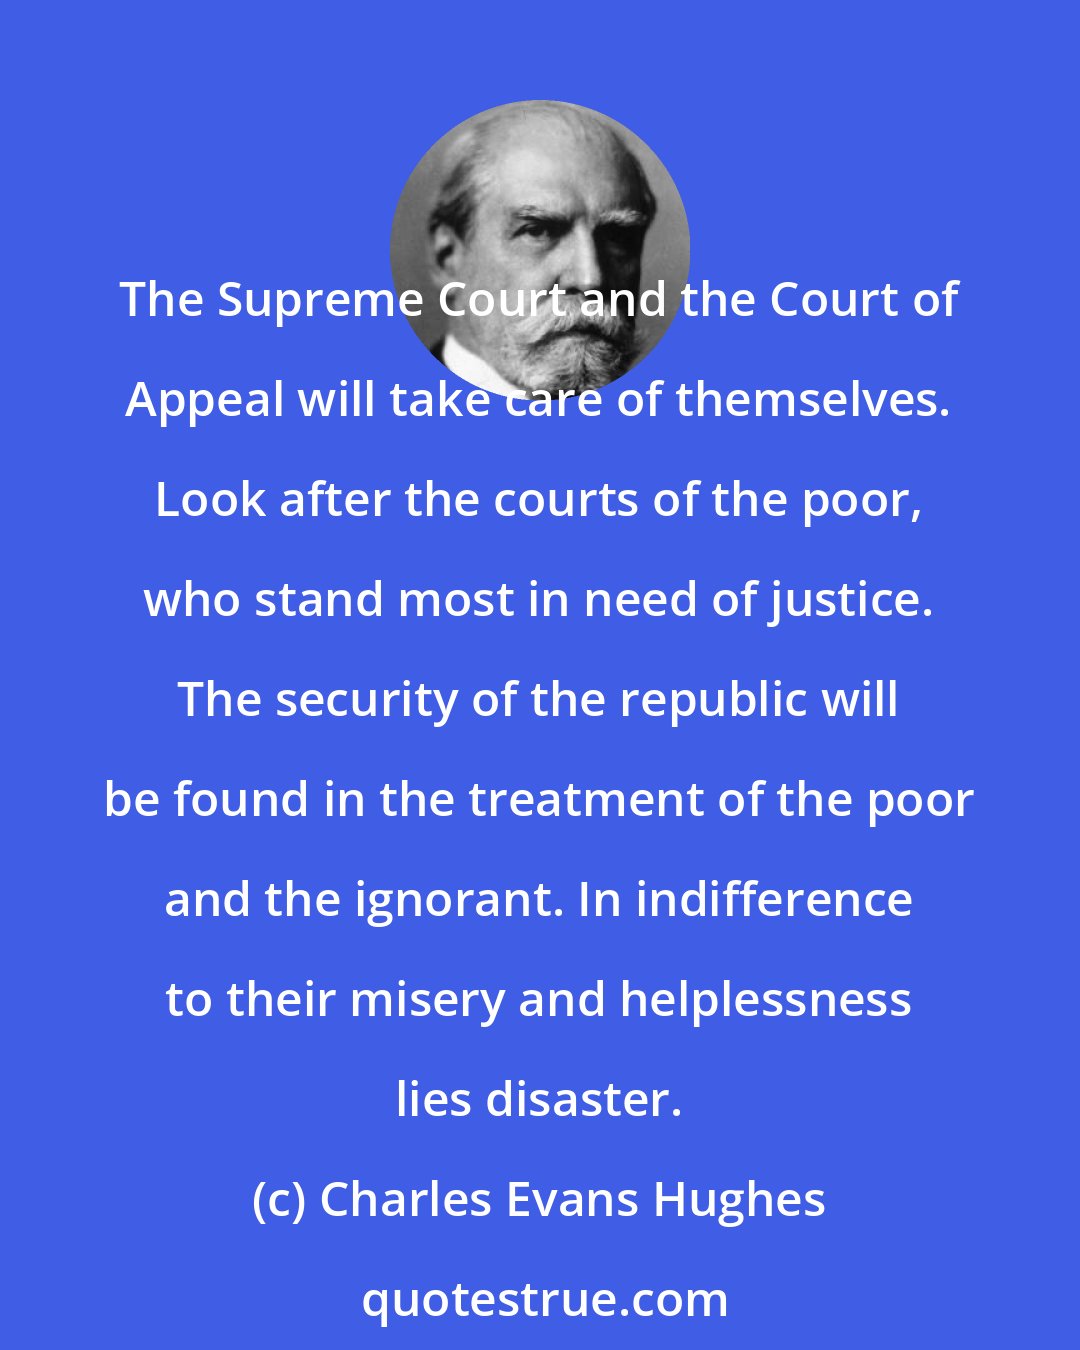 Charles Evans Hughes: The Supreme Court and the Court of Appeal will take care of themselves. Look after the courts of the poor, who stand most in need of justice. The security of the republic will be found in the treatment of the poor and the ignorant. In indifference to their misery and helplessness lies disaster.